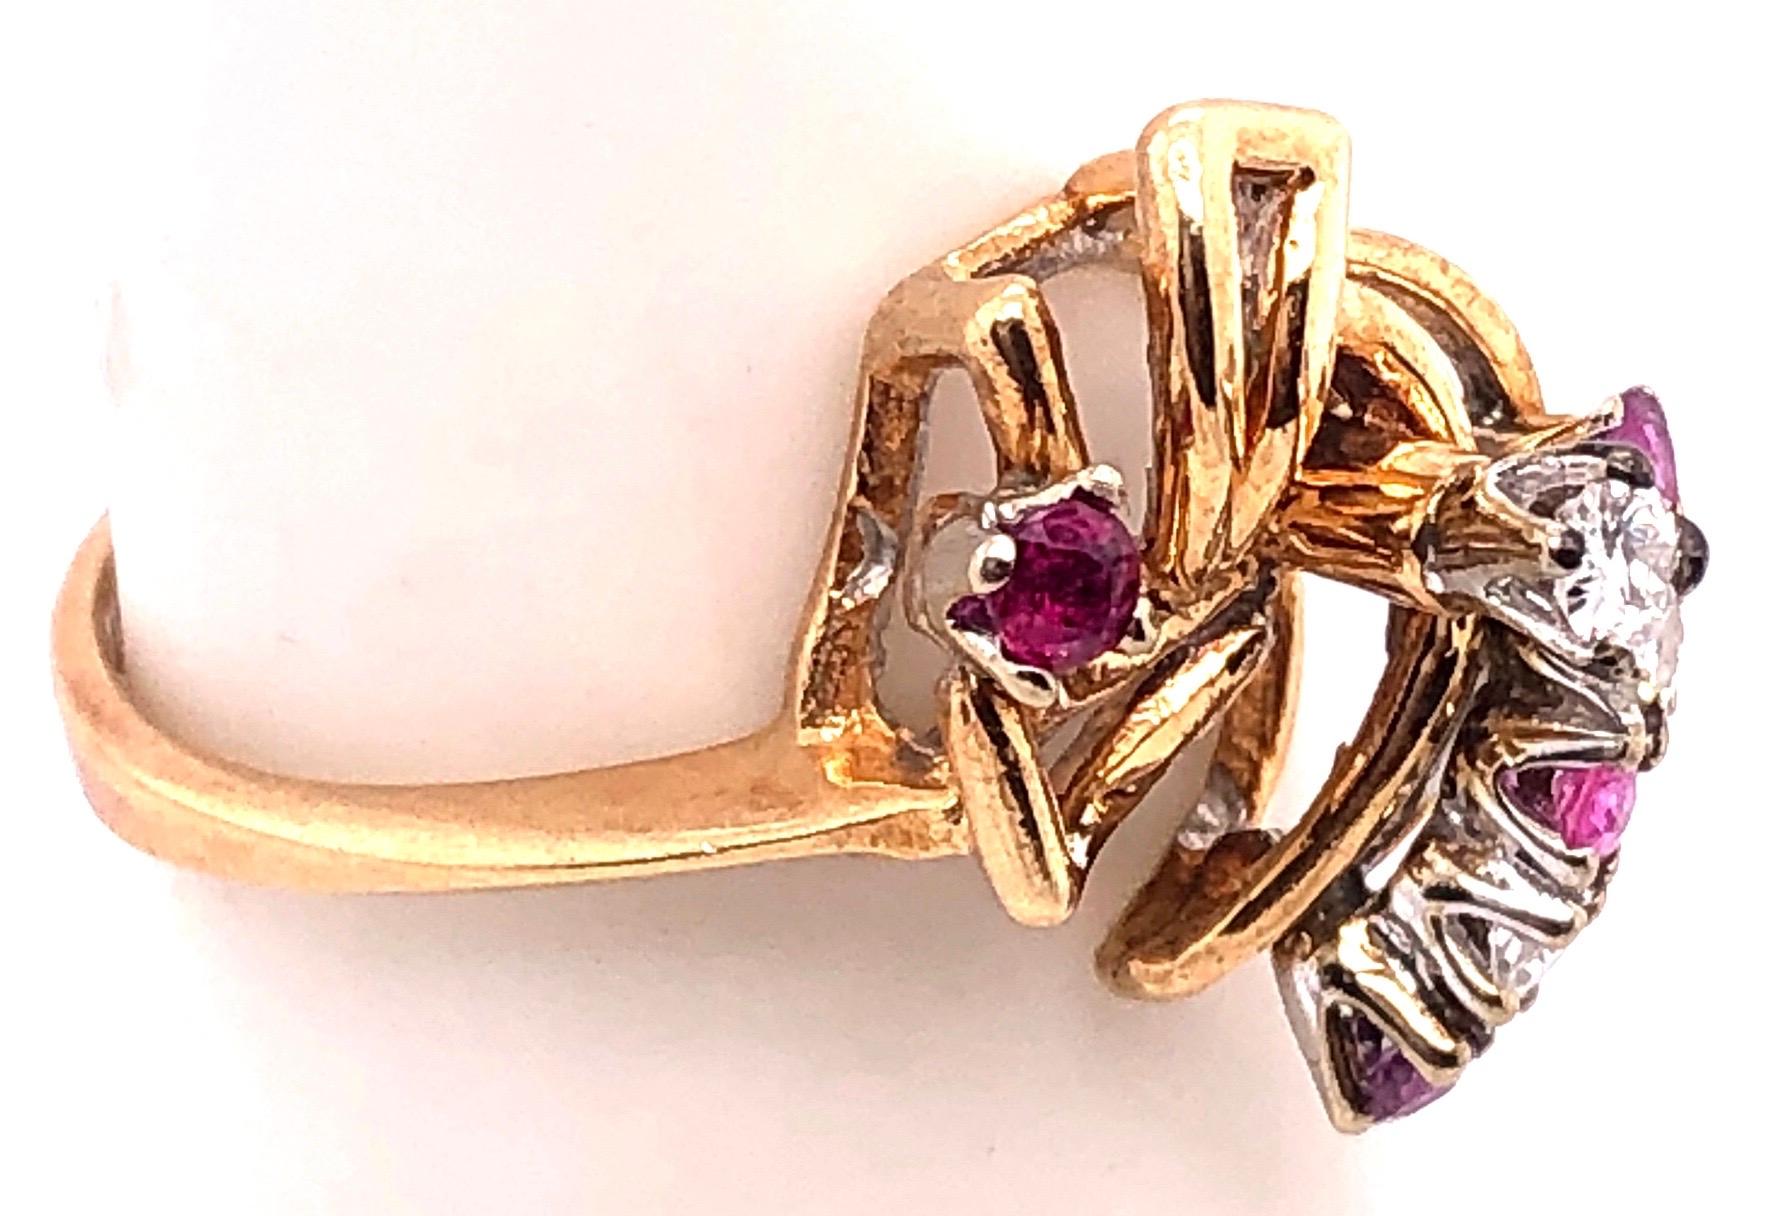 14 Karat Yellow Gold Contemporary Ring with Rubies and Diamonds.
0.03 total diamond weight.
Size 6.5
3.57 grams total weight.